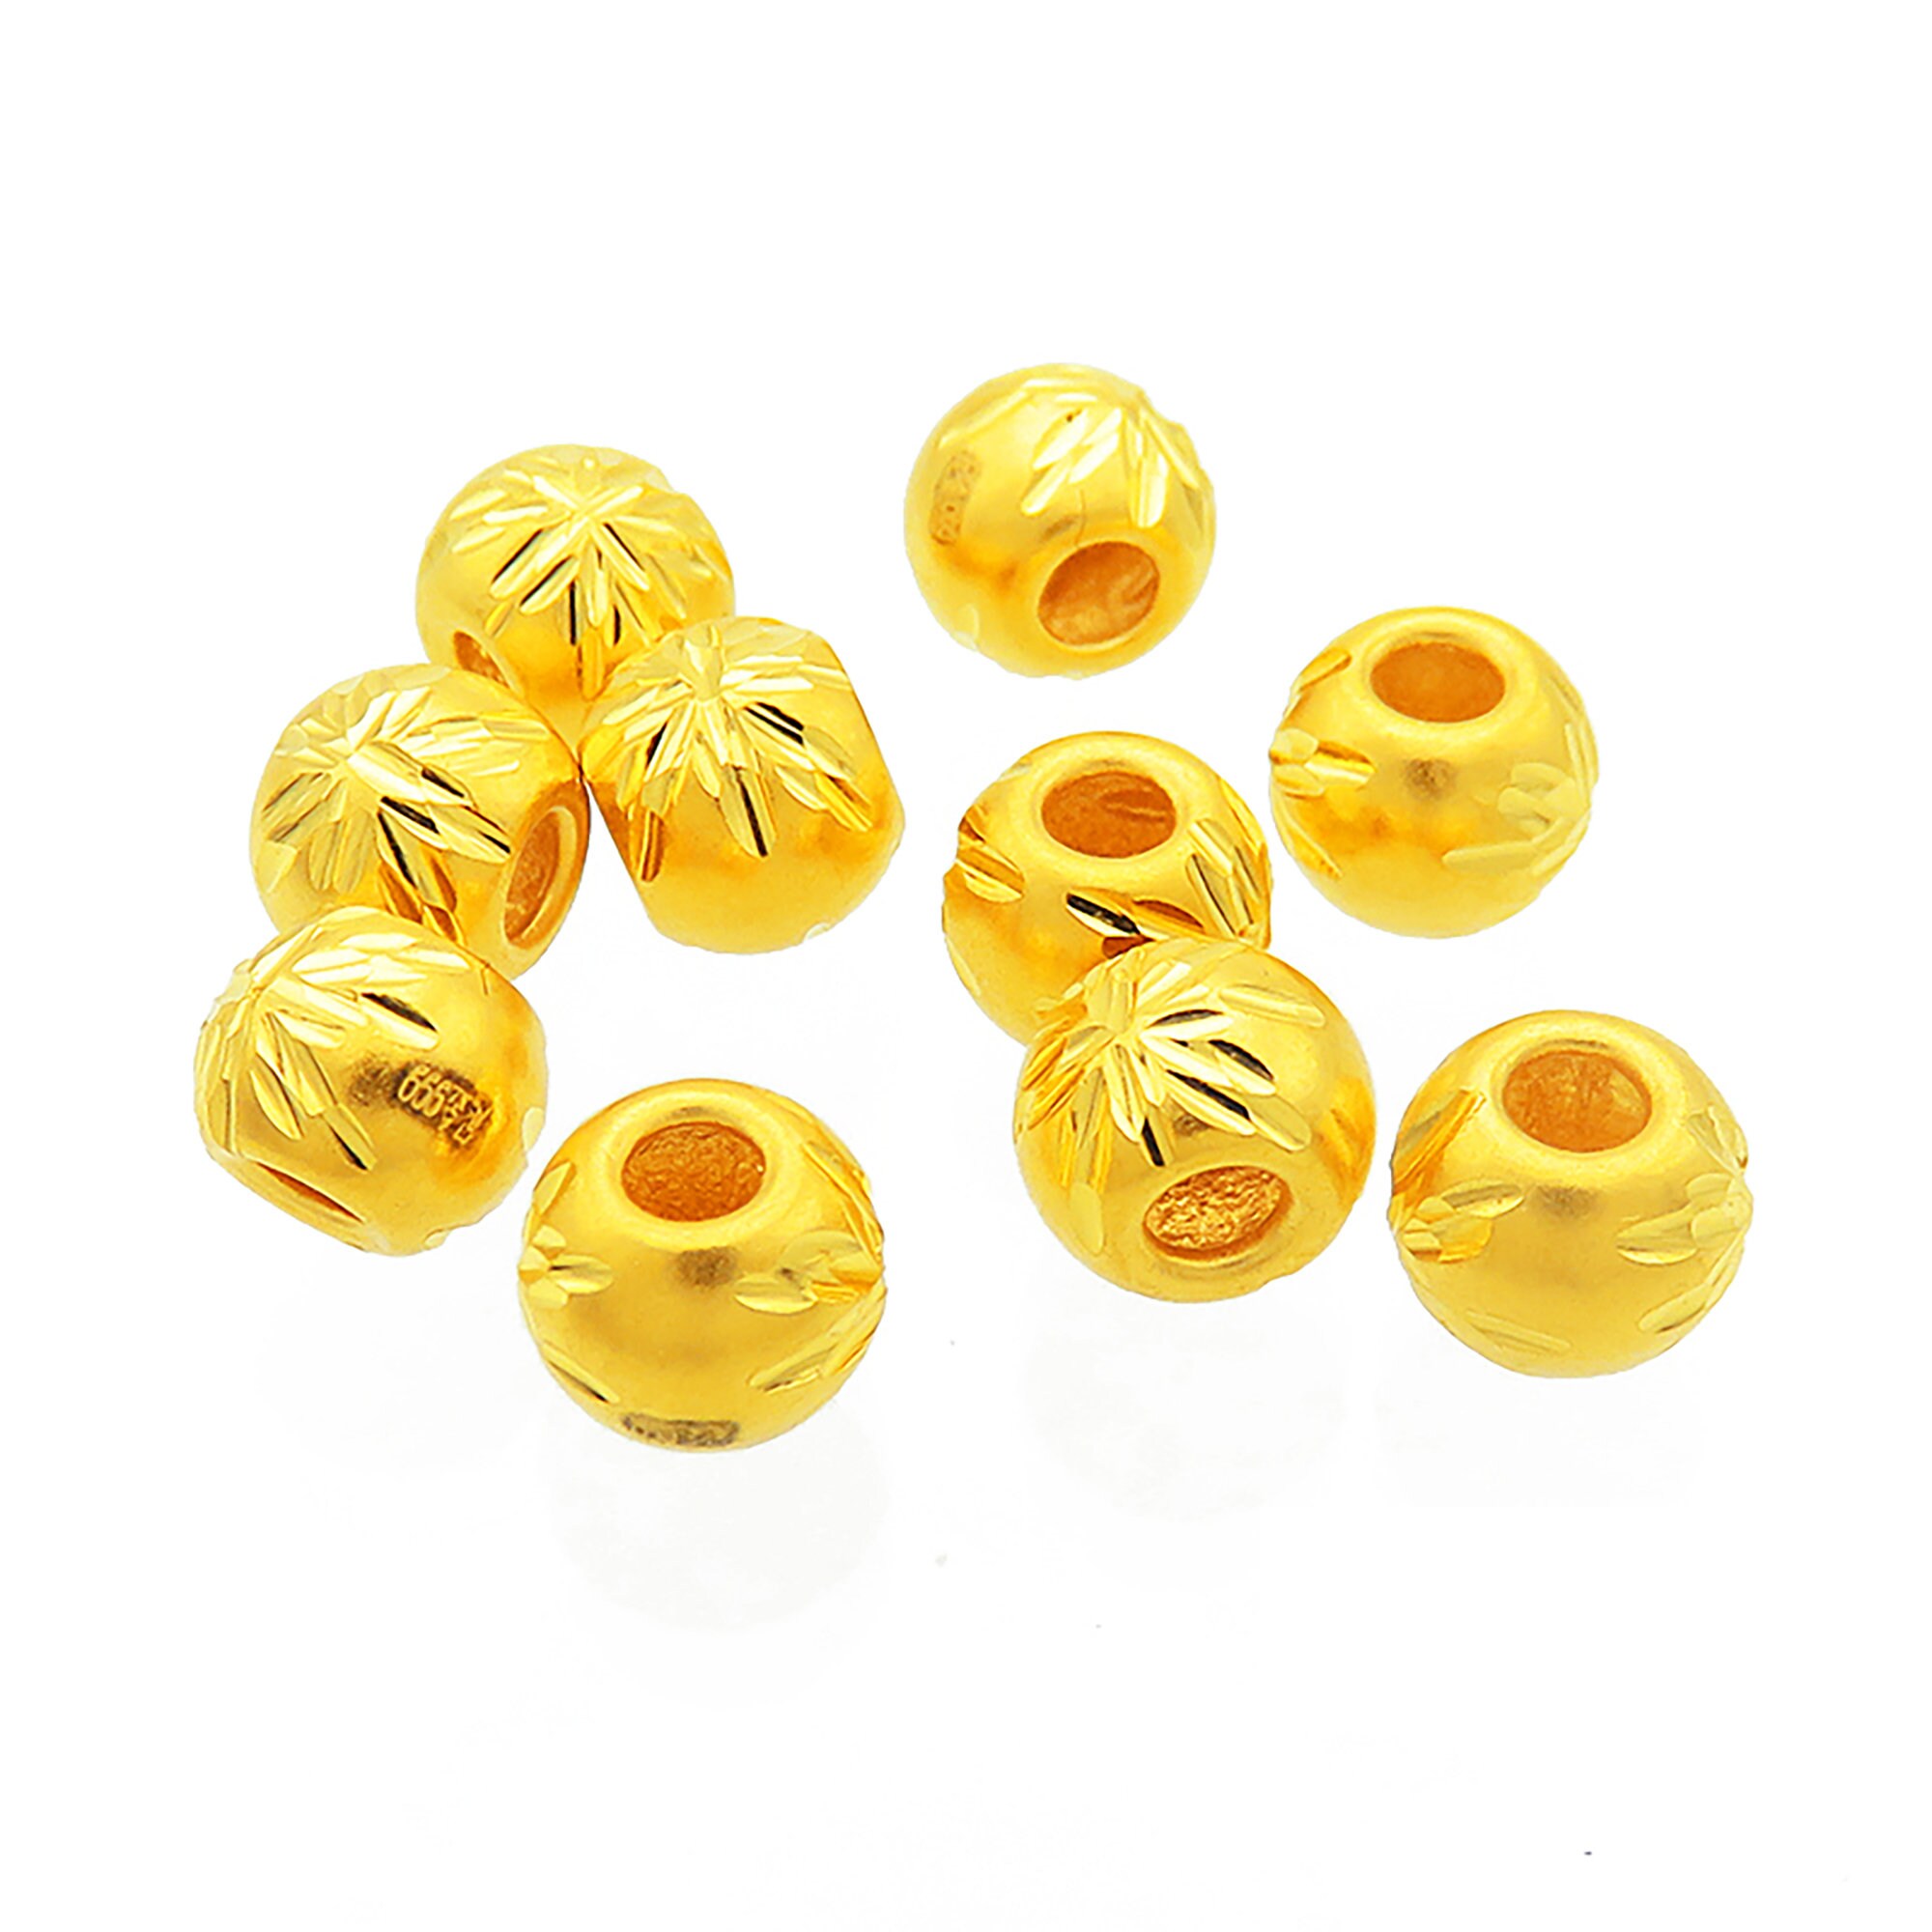 Vintage antique handmade loose beads traditional designer 22k yellow gold  beads or ball for custom jewelry making Bead21